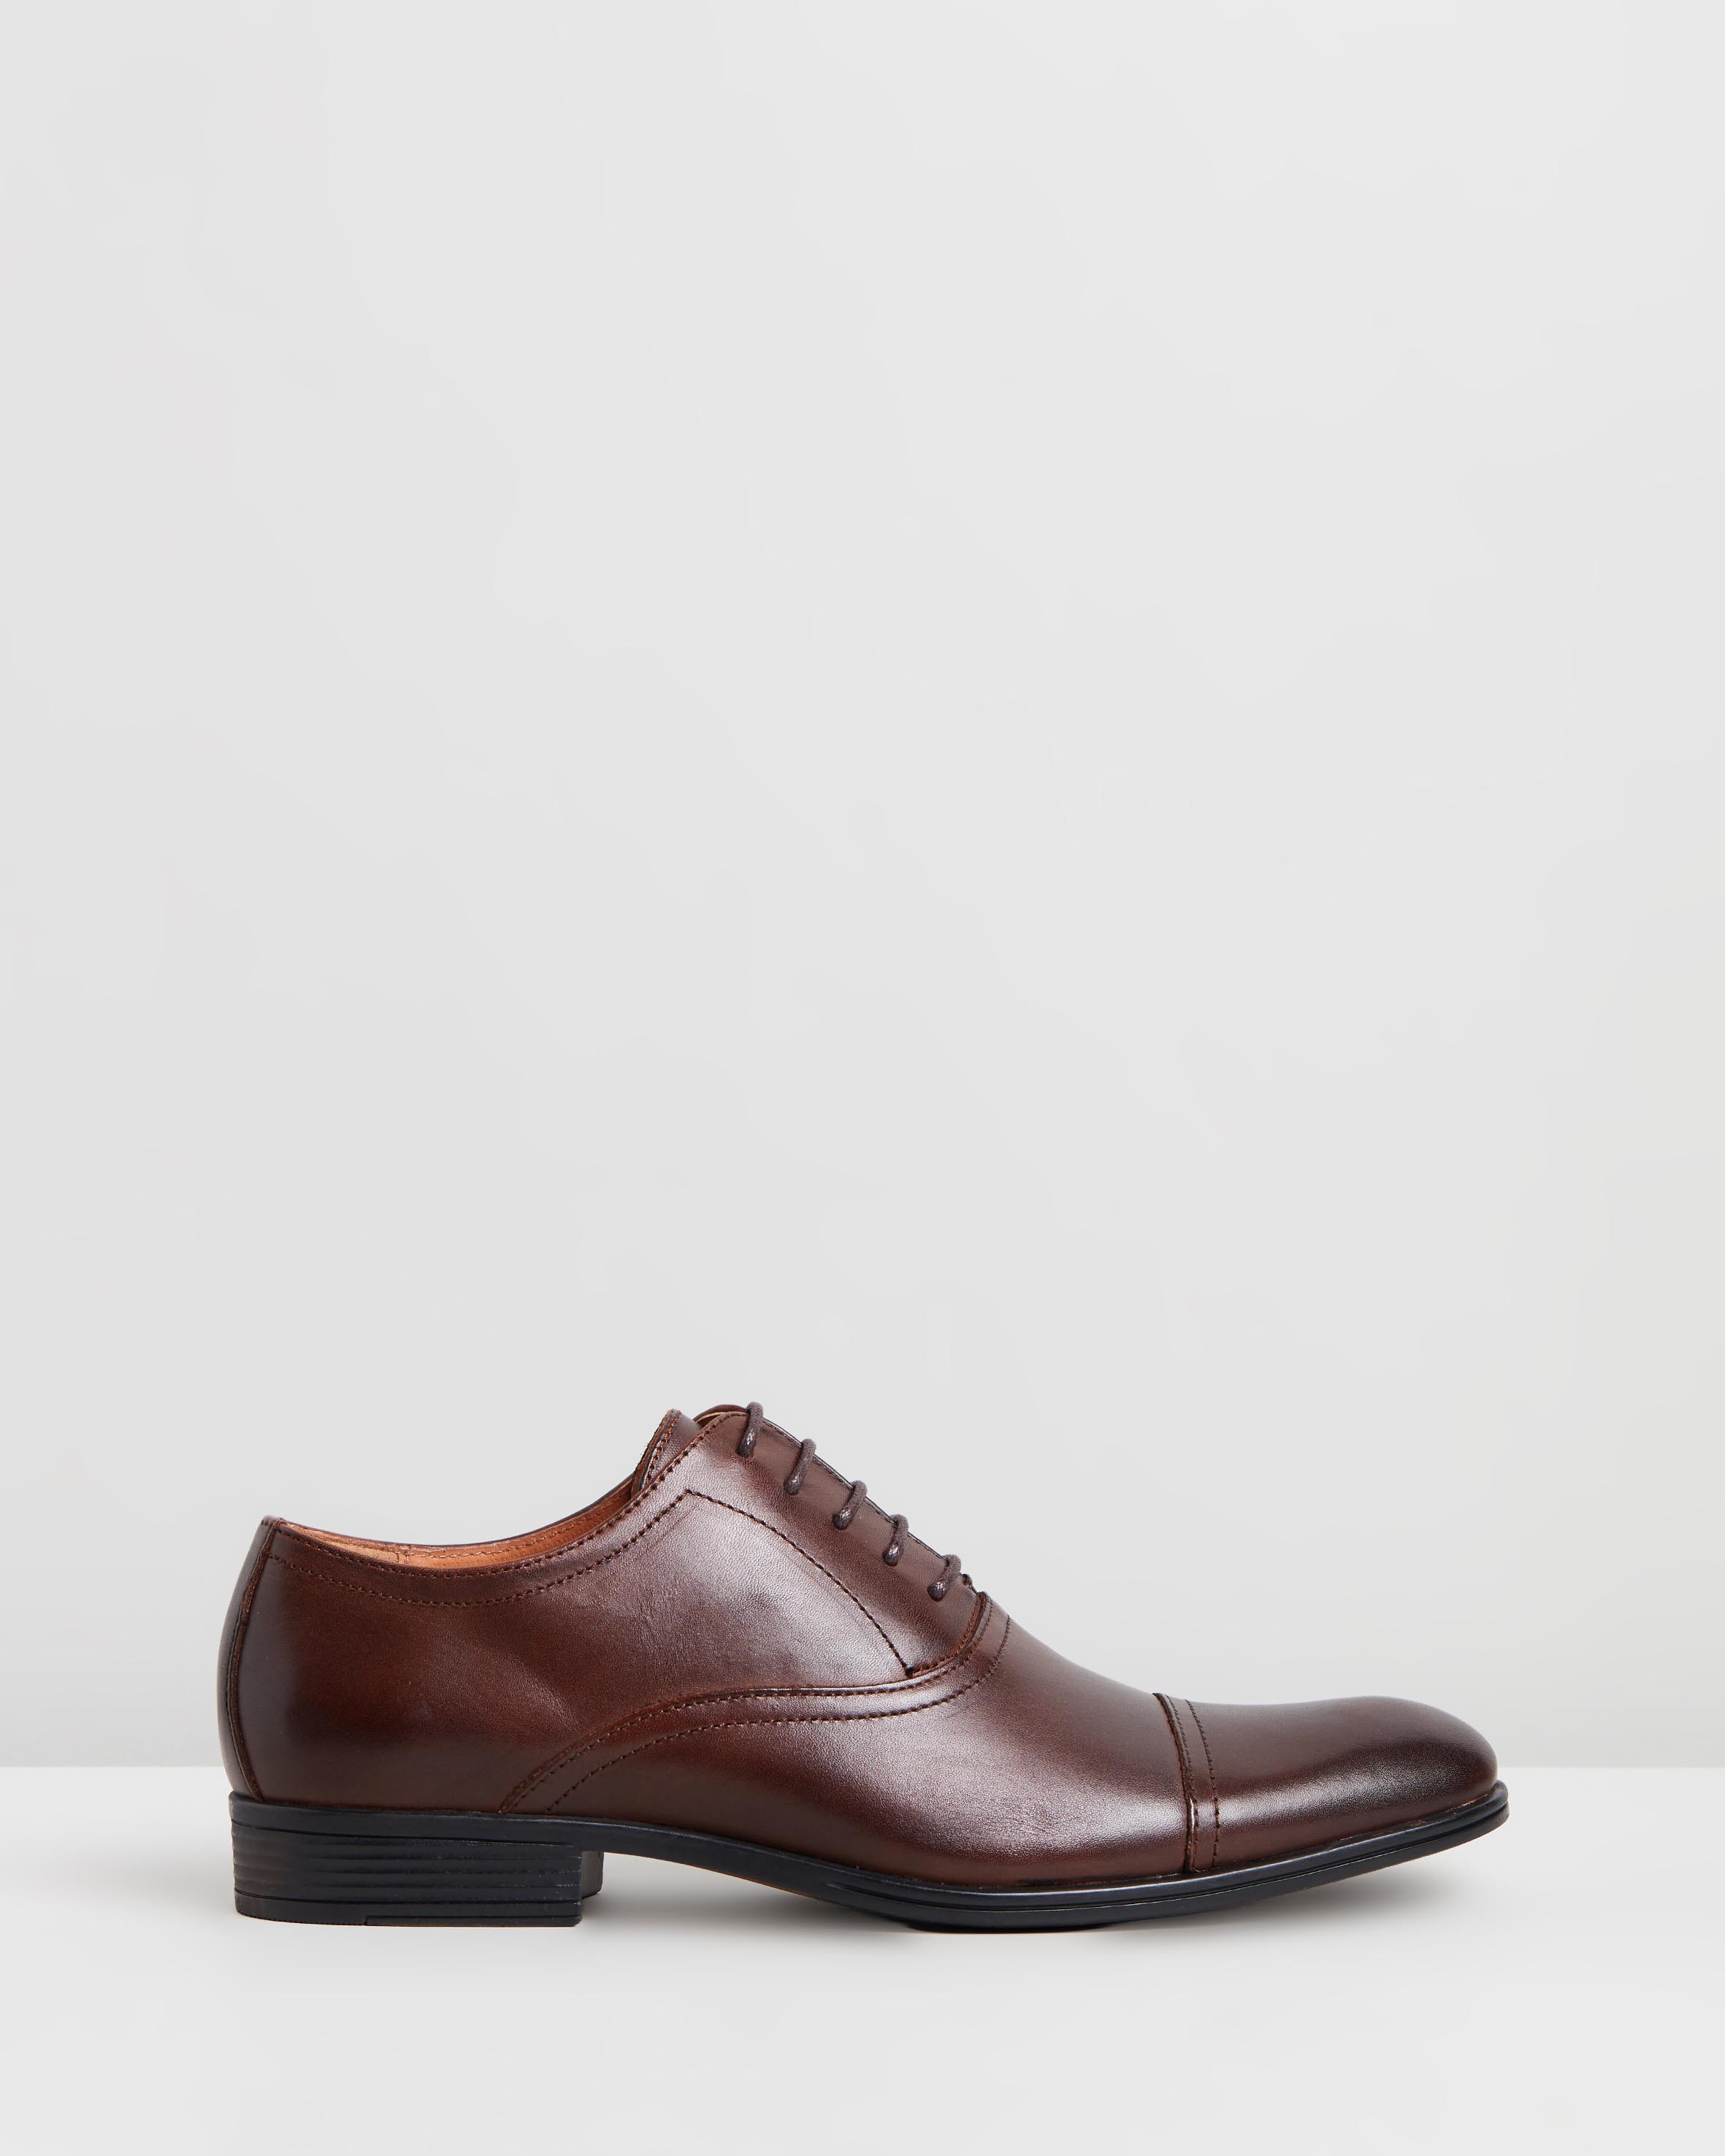 Accolade Performance Shoes Brown by Banks | ShoeSales